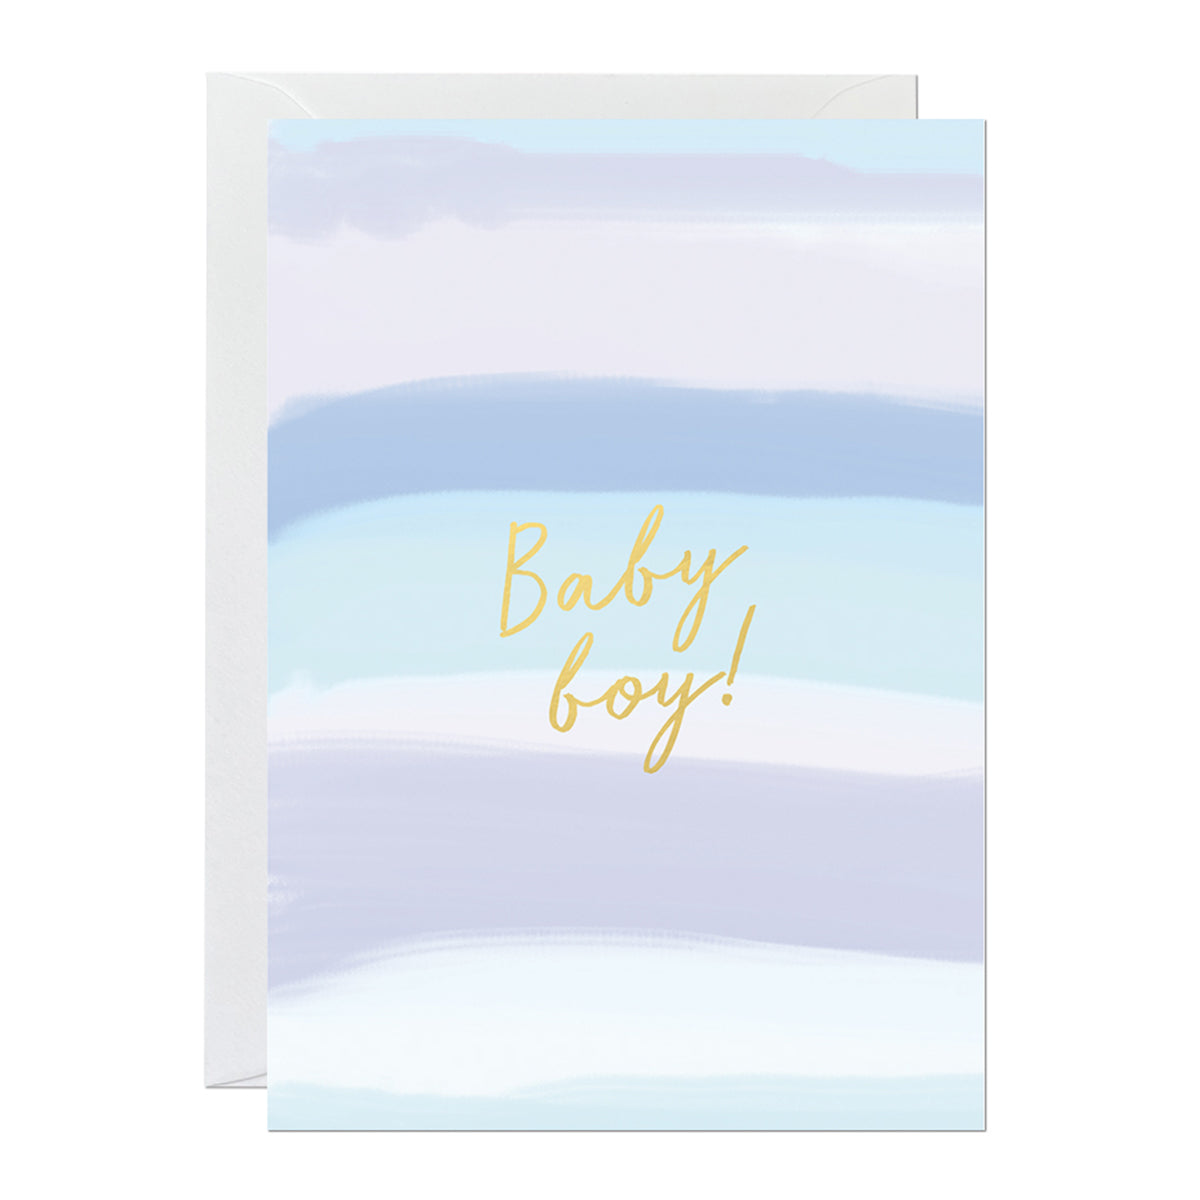 A new baby card featuring a hand-painted canvas and a 'baby boy' greeting printed with gold foil